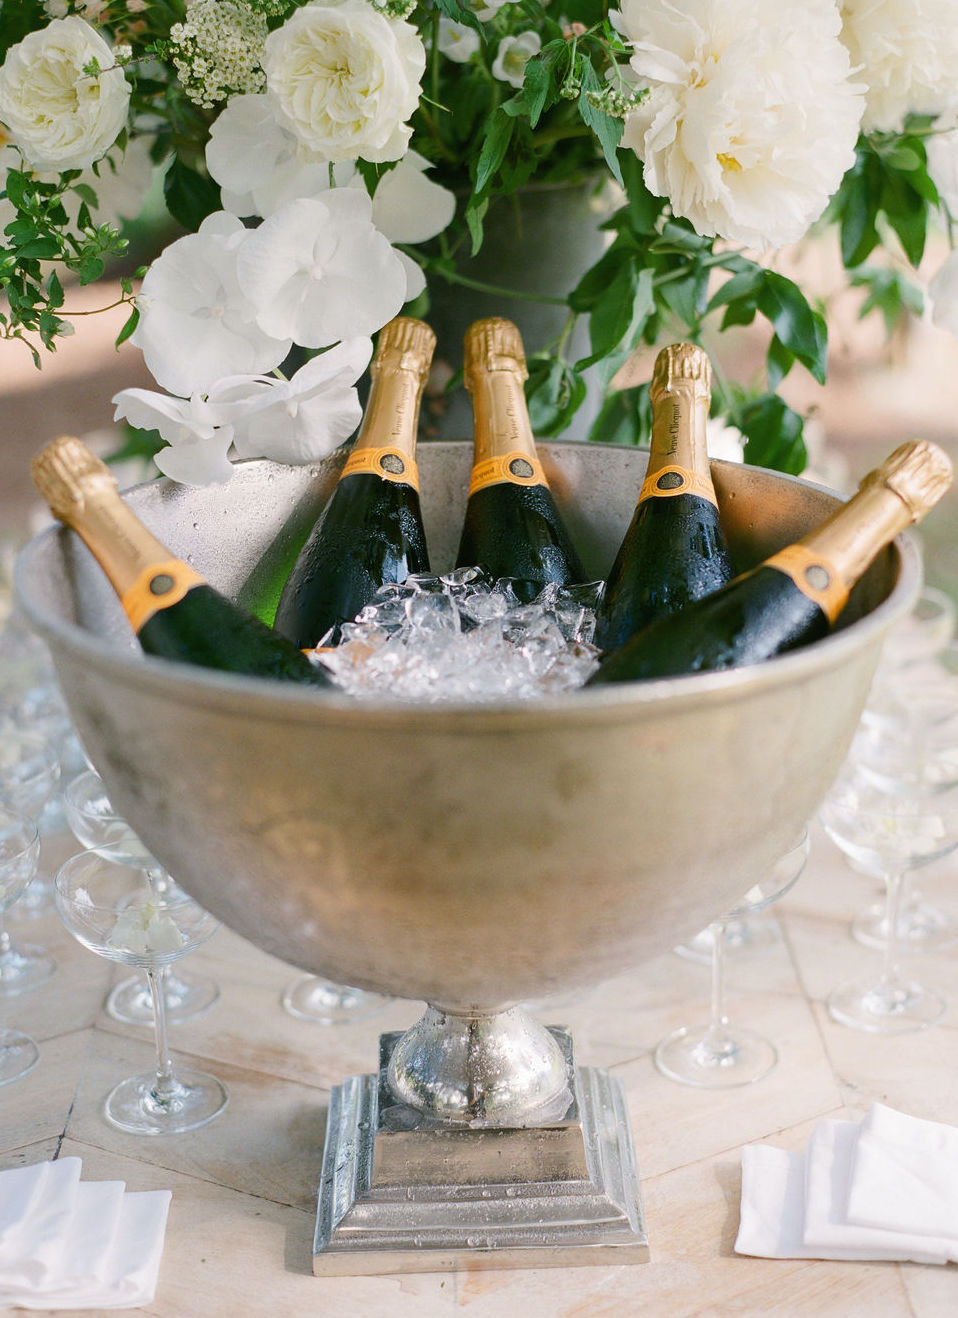 A bucket of Veuve Cliquot champagne for an alfresco wedding in the Lowcountry.